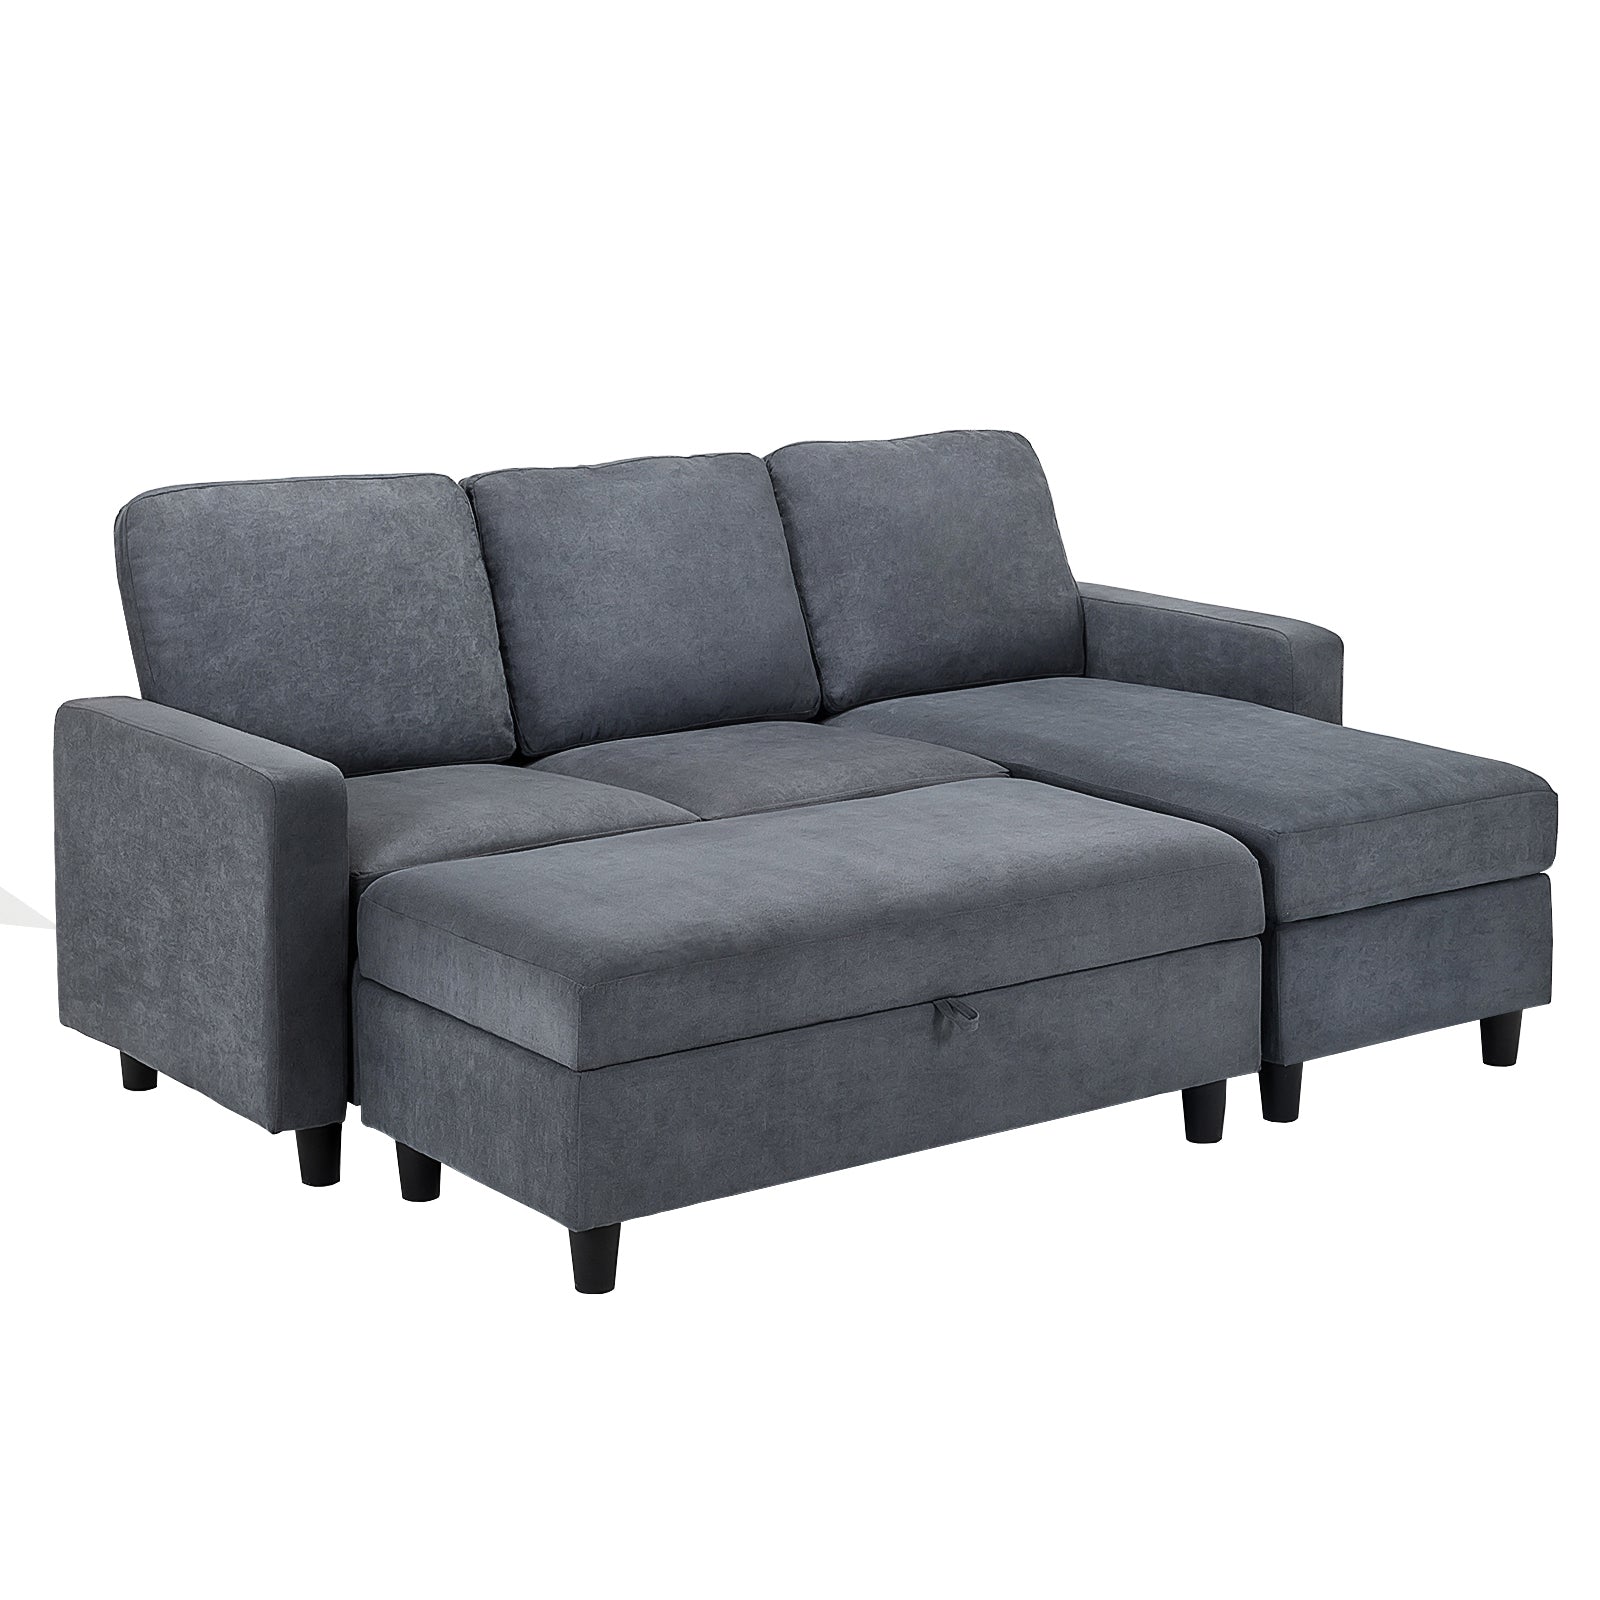 Honbay 3-Seat Sectional Sofa Dark Grey with Ottoman Table